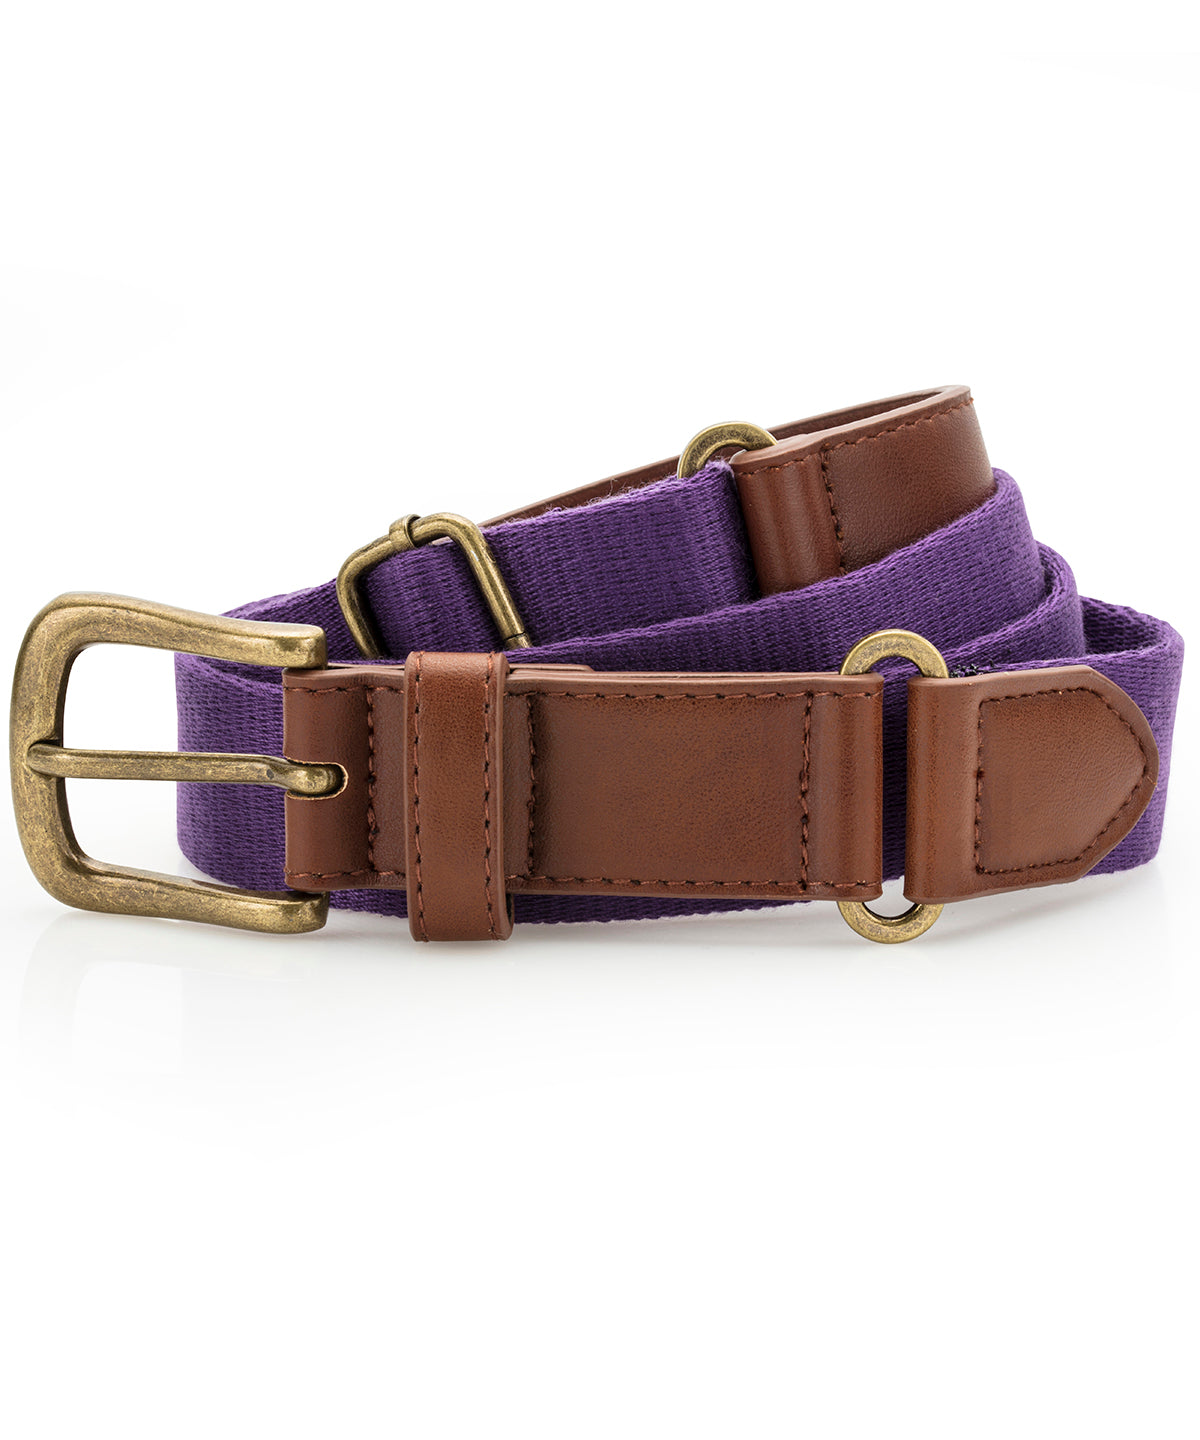 Faux leather and canvas belt